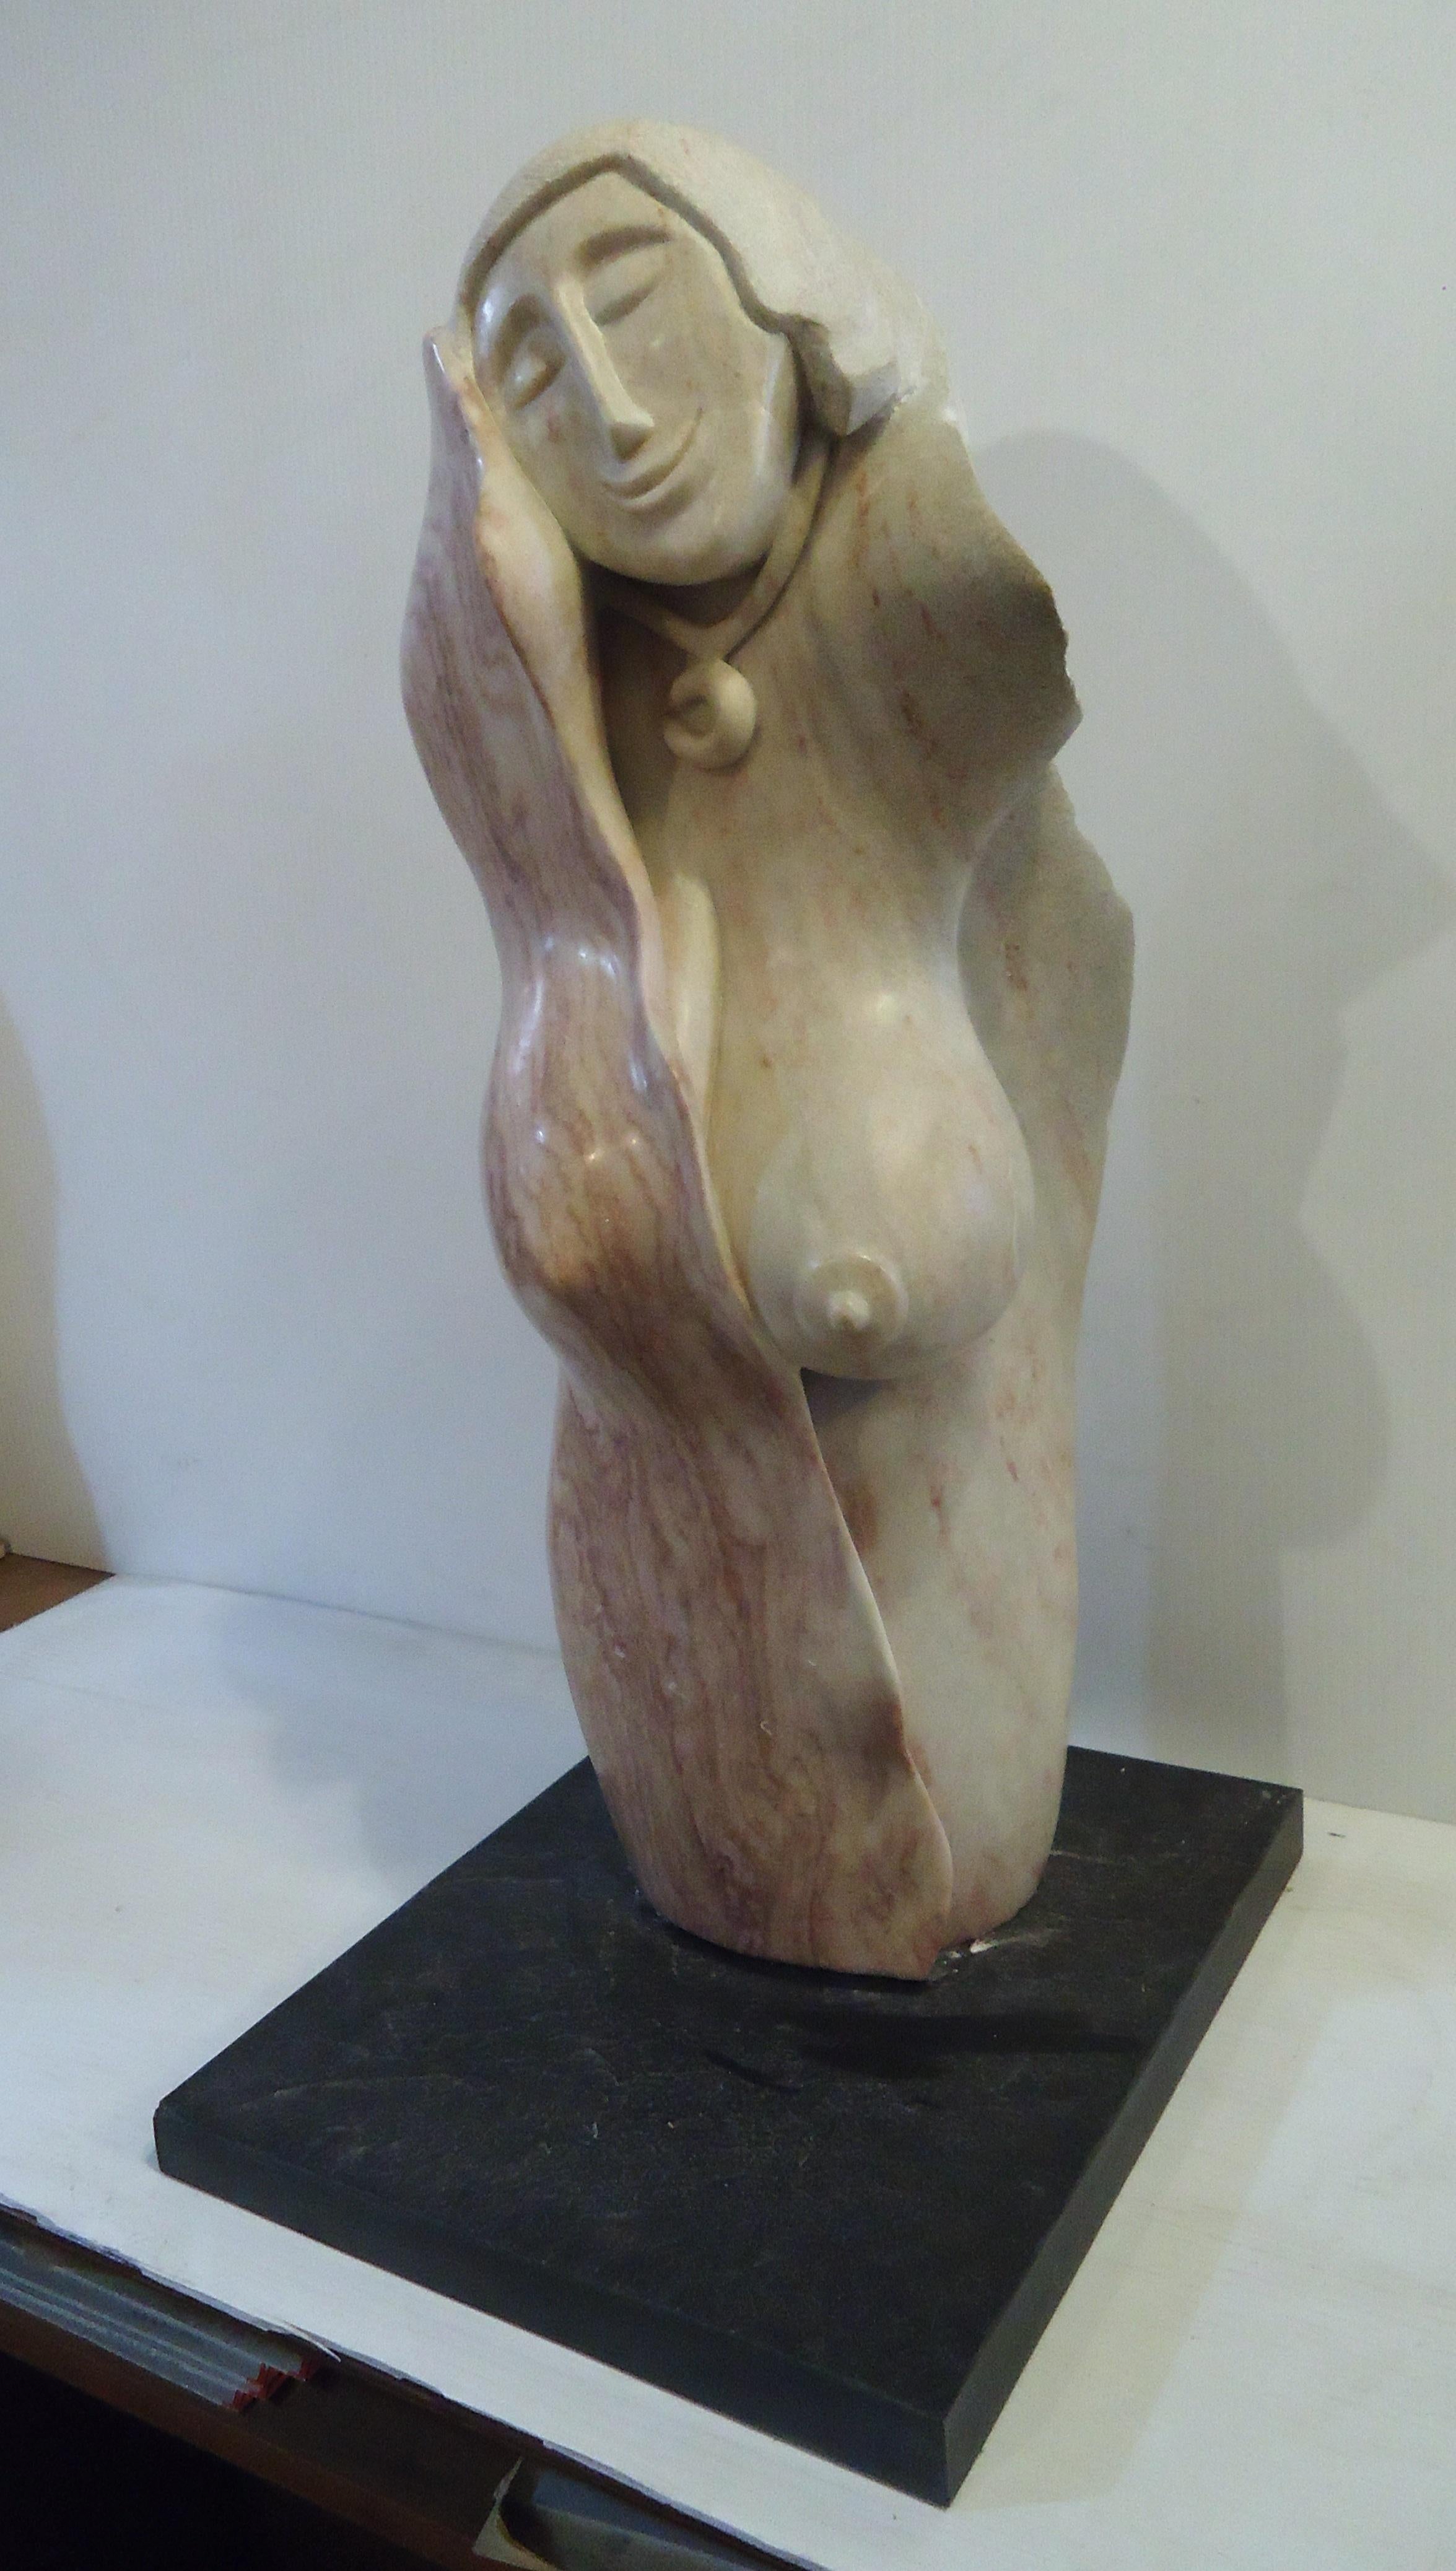 Beautiful marble sculpture of a female torso, face, on granite base. Smooth and rough surfaces give a nice composition. (Please confirm item location, NY or NJ, with dealer).